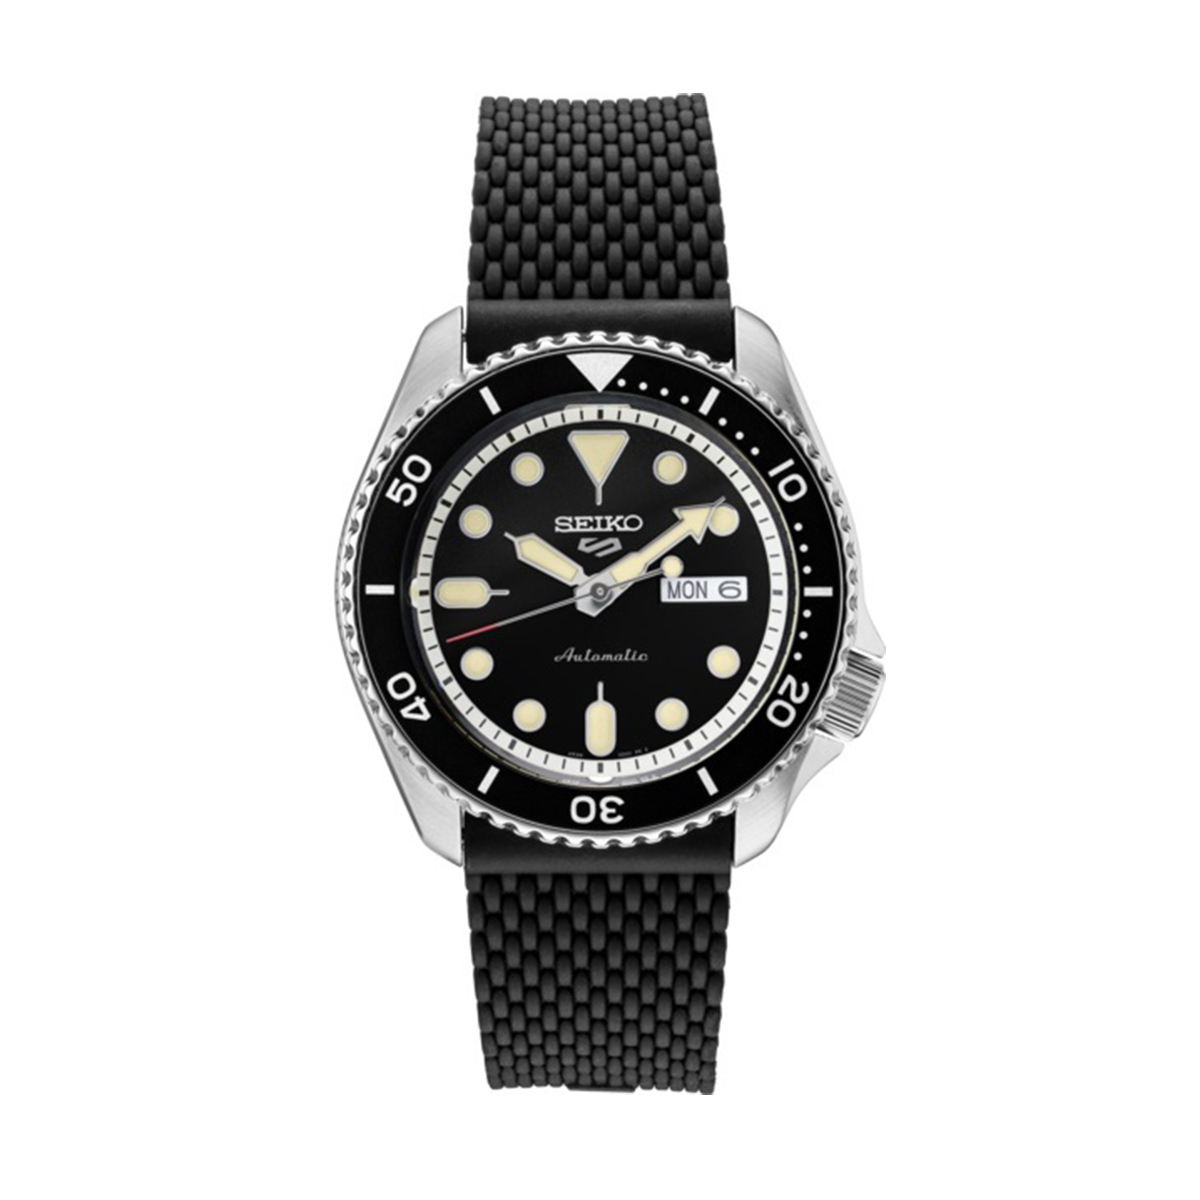 Stainless steel Seiko 5 Sports Automatic Watch